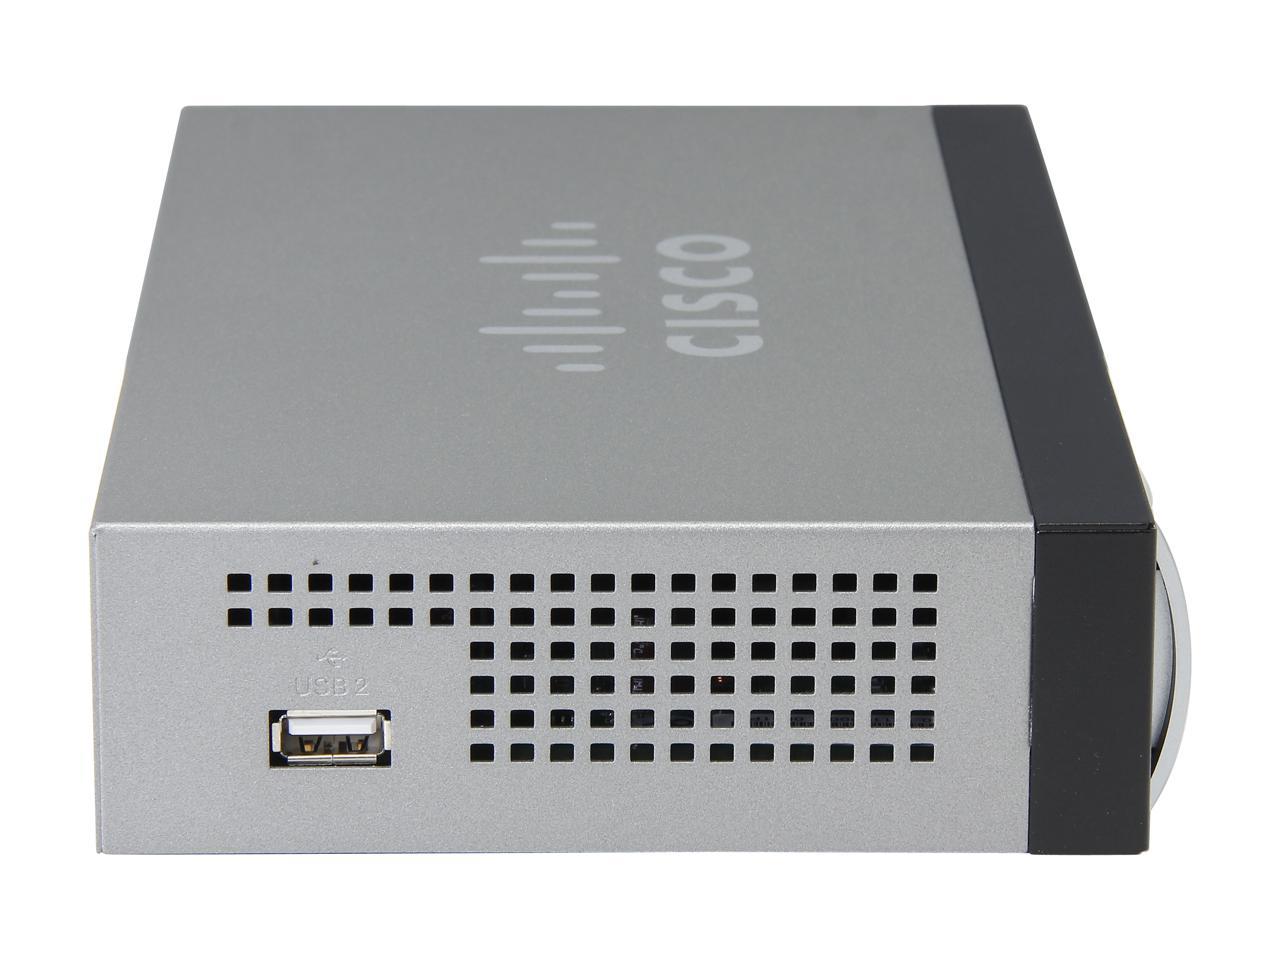 cisco small business routers review